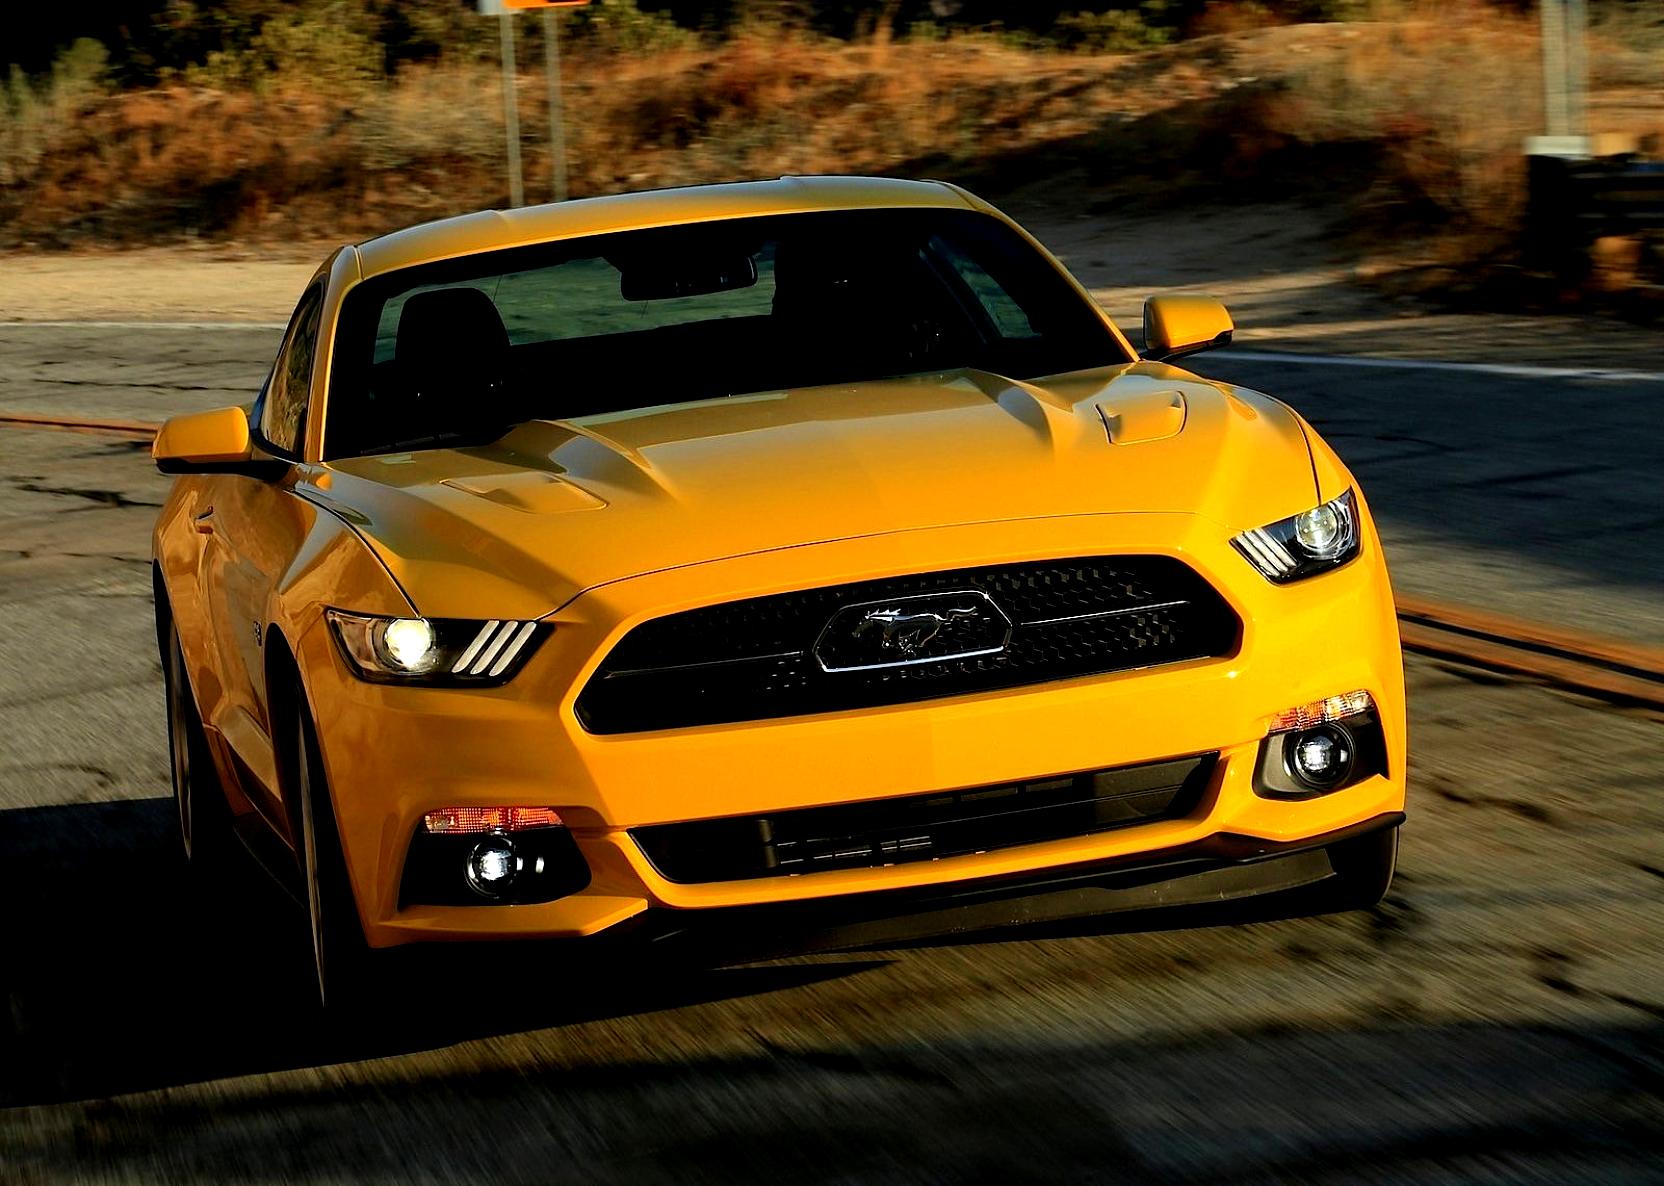 Ford Mustang 2014 #54